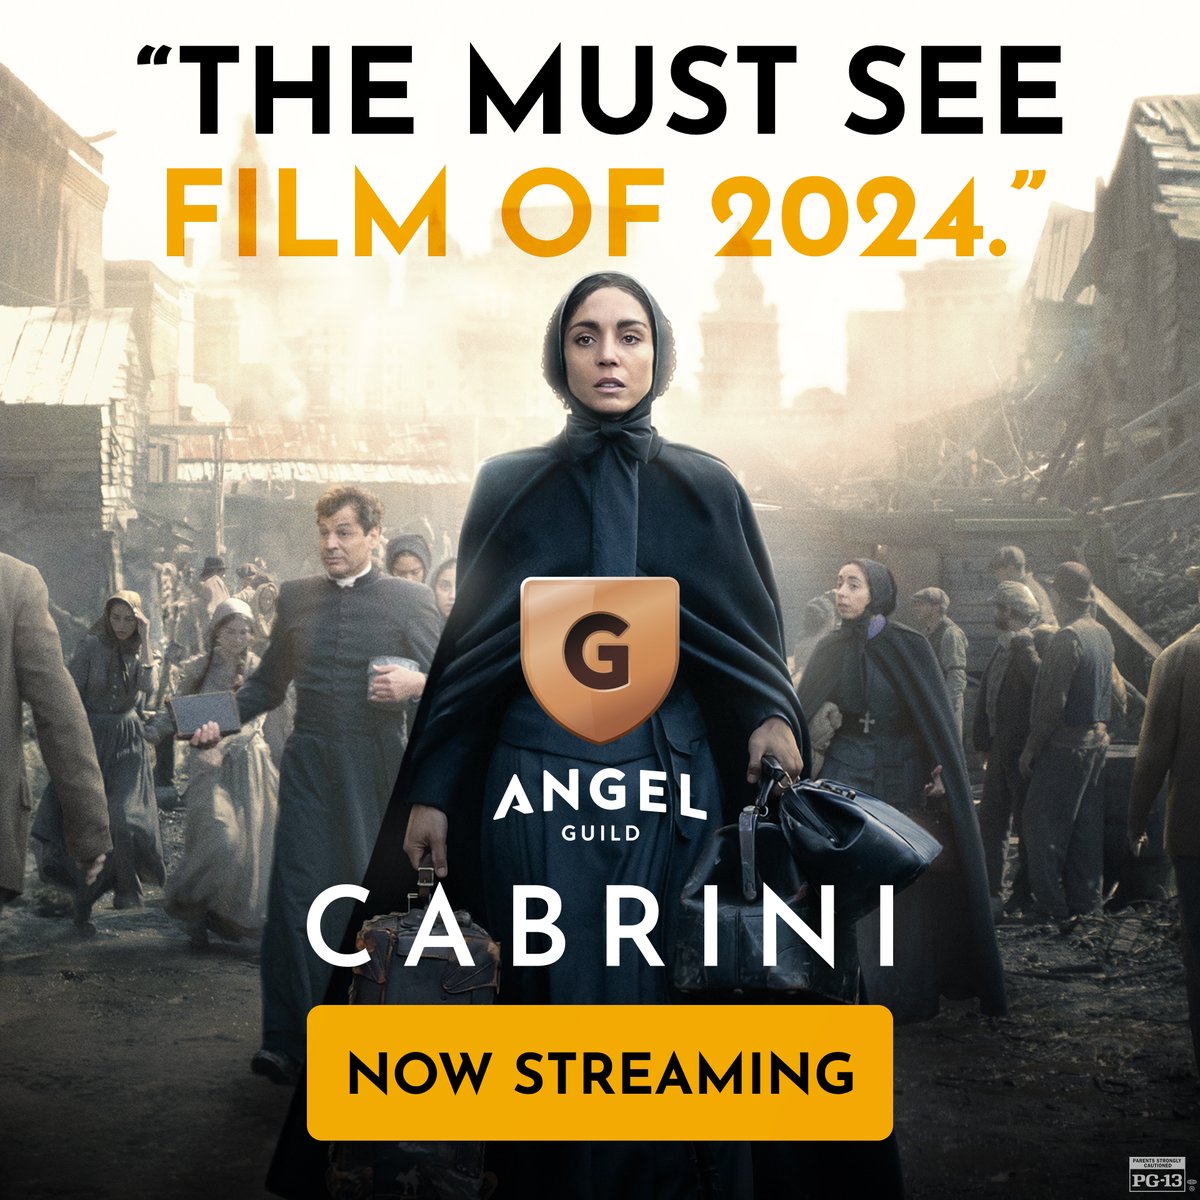 Experience the film that audiences and critics are praising! Members of the Angel Guild have exclusive access to stream Cabrini NOW. Become a member at angel.com/cabrini 💛

#Cabrini #CabriniMovie #AngelStudios #AngelGuild #NowStreaming